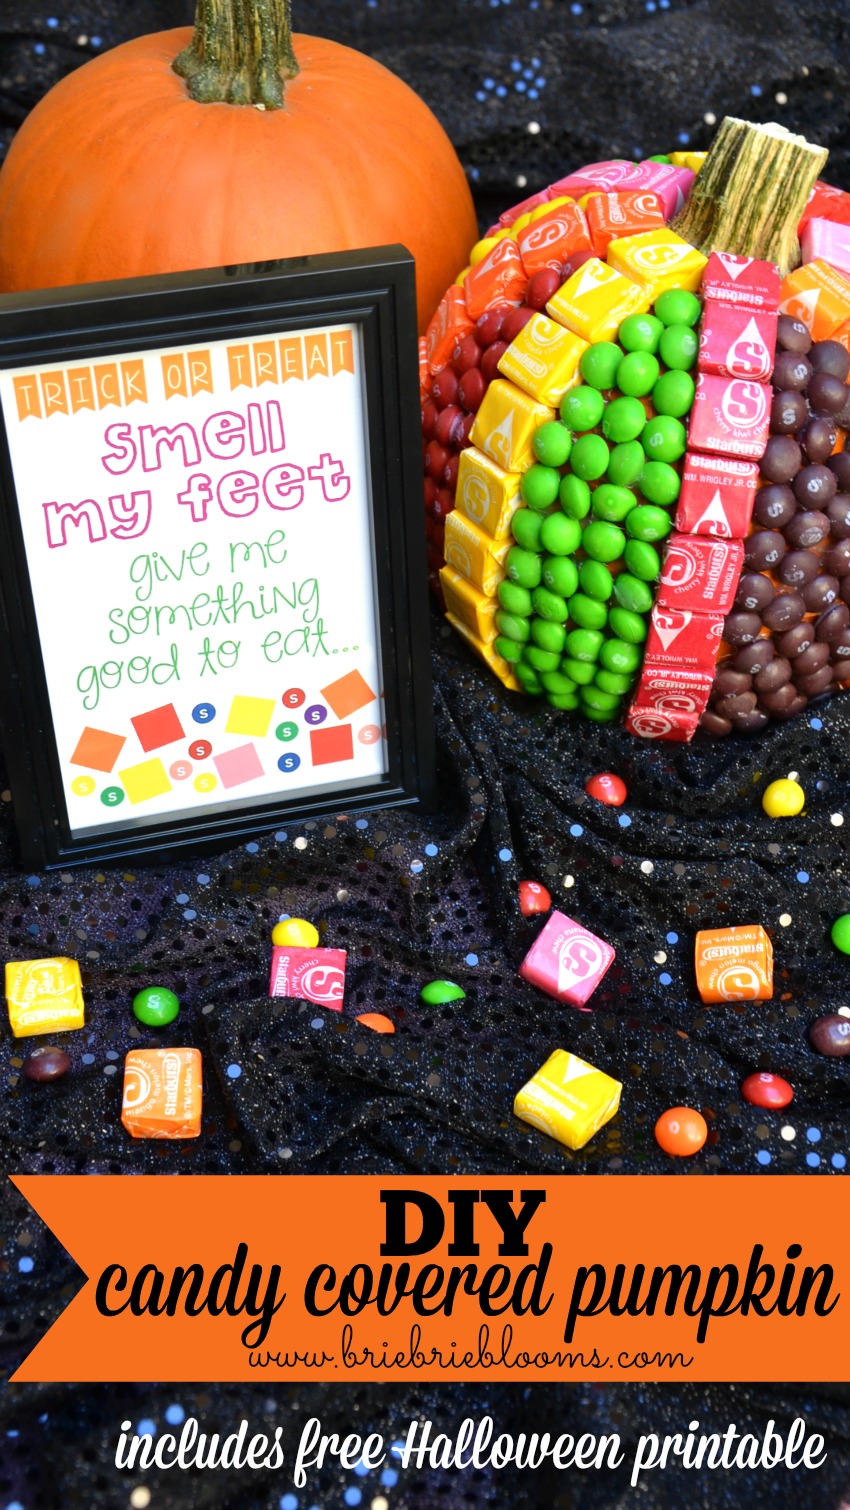 DIY-candy-covered-pumpkin-with-free-Halloween-printable